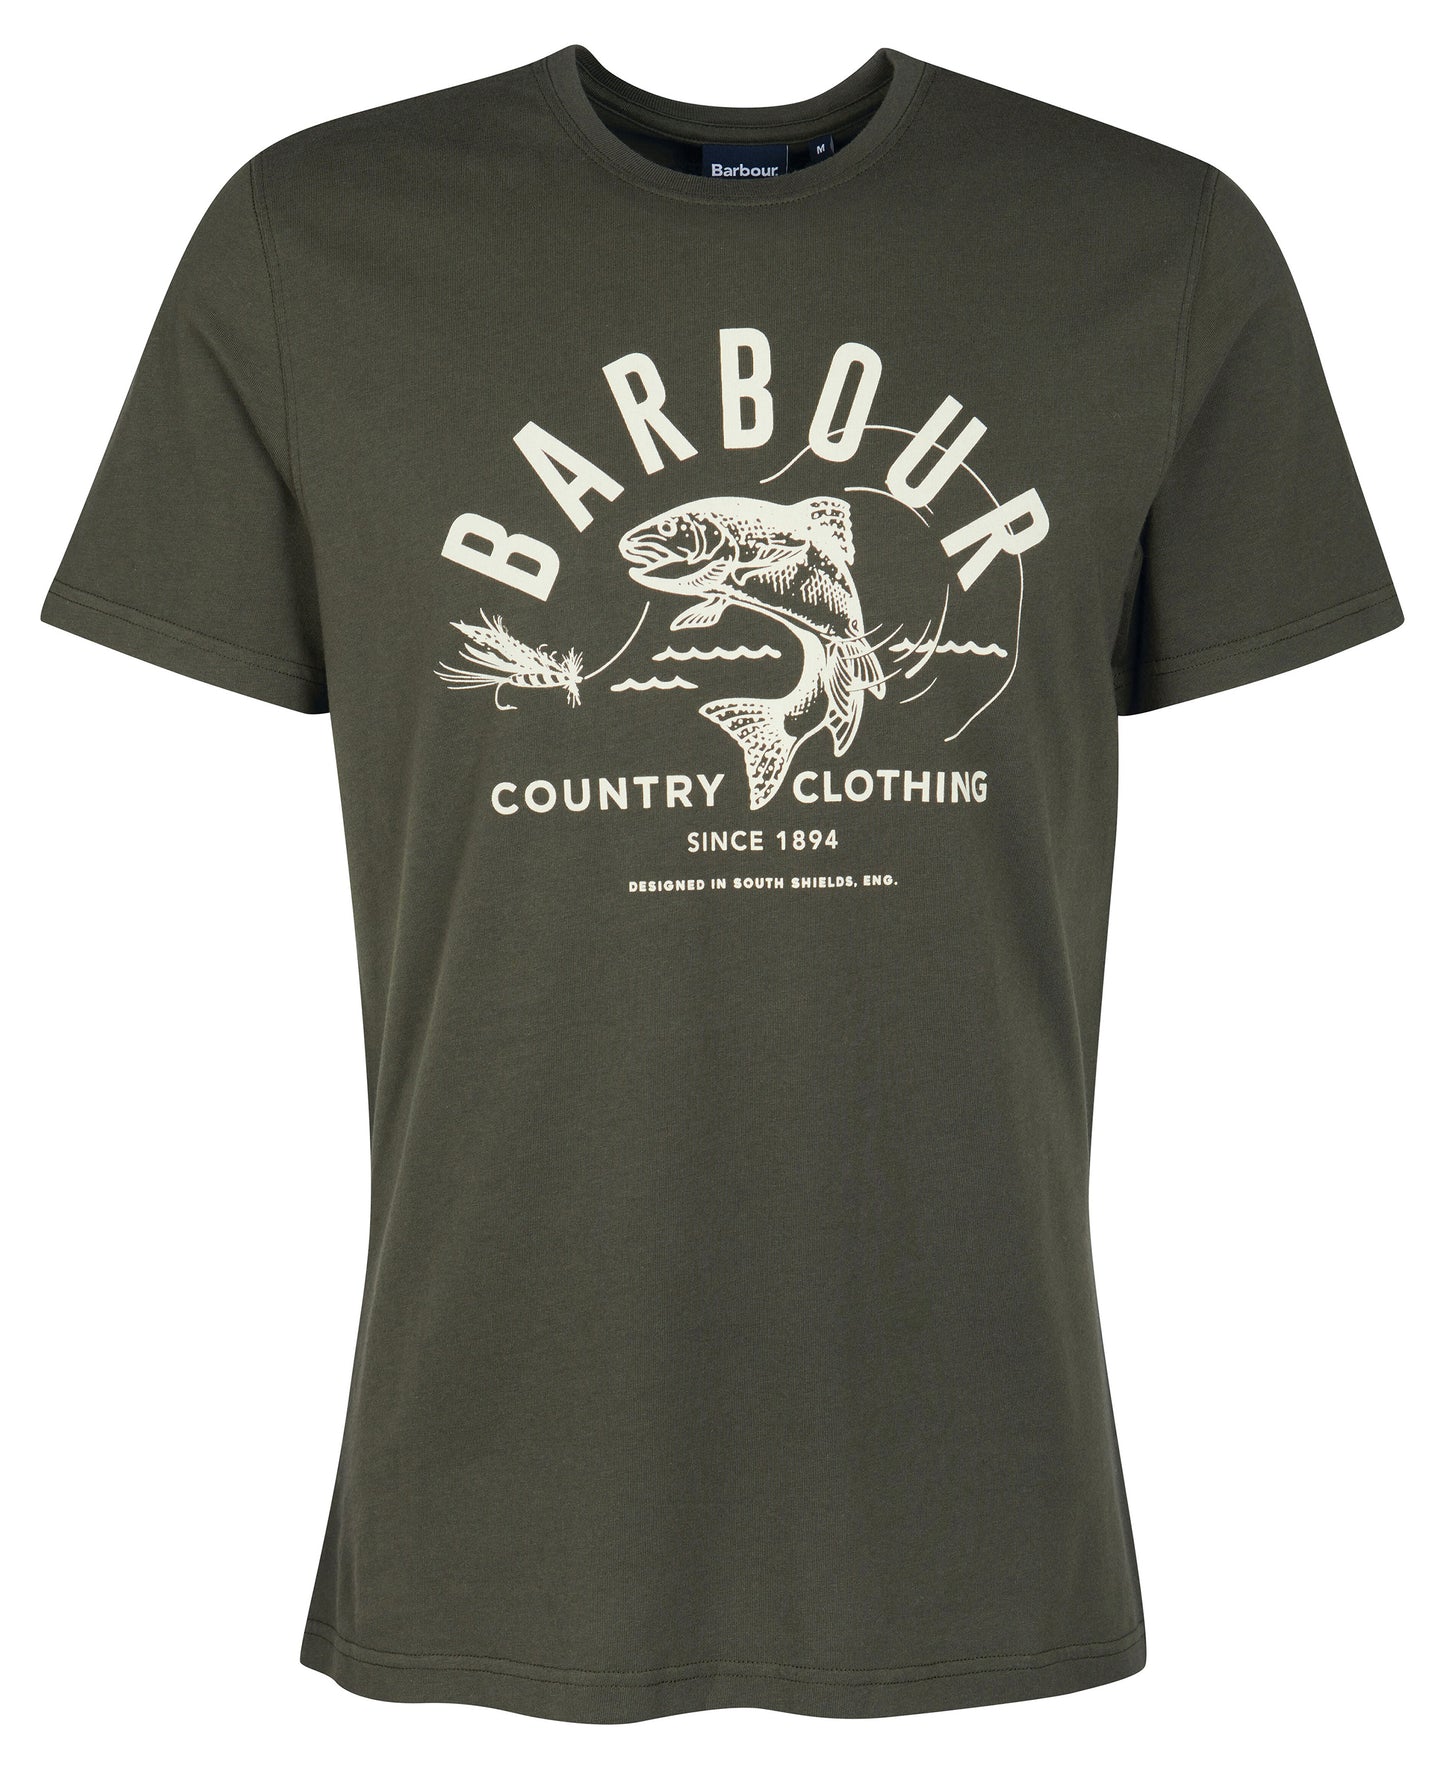 Barbour Country Clothing T-Shirt